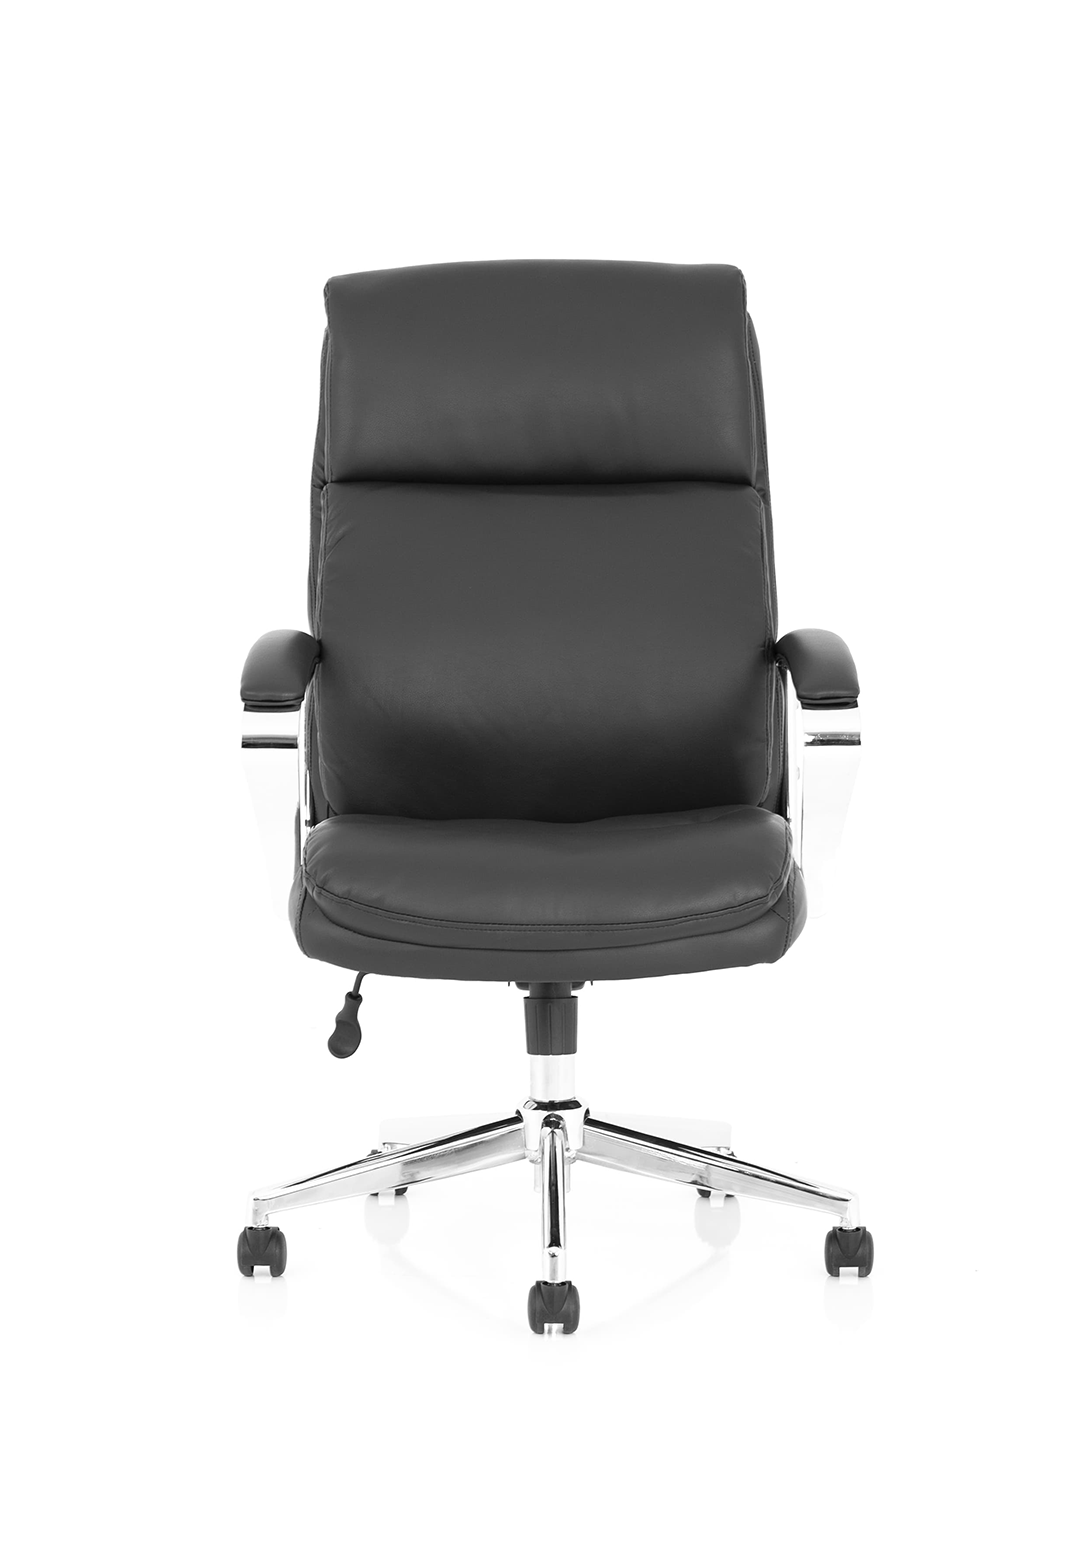 Tunis Exec Home Office Chair | Executive Chair | Home Office Furniture | Leather Executive Chair | Leather Swivel Chair | Swivel Chair